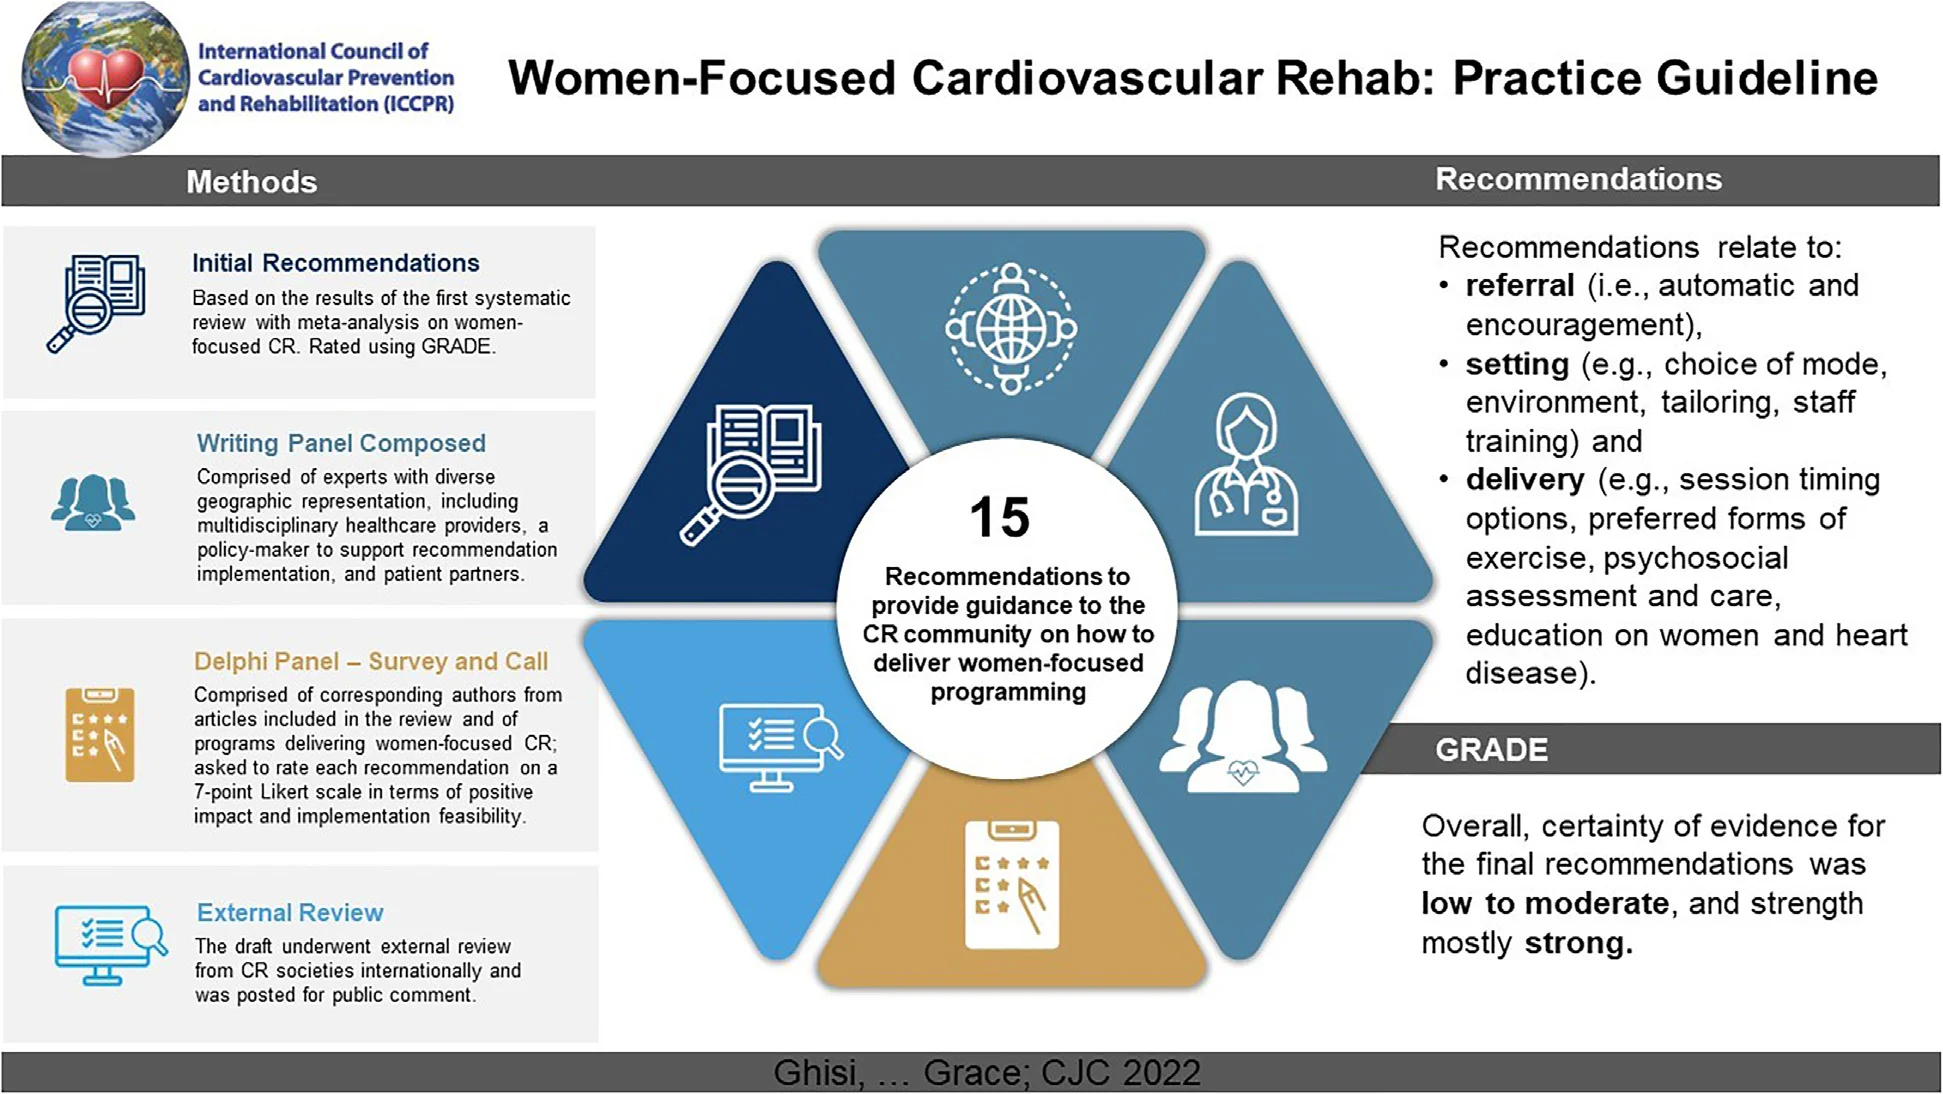 ICCPR infographic showing women-focused cardiovascular rehab